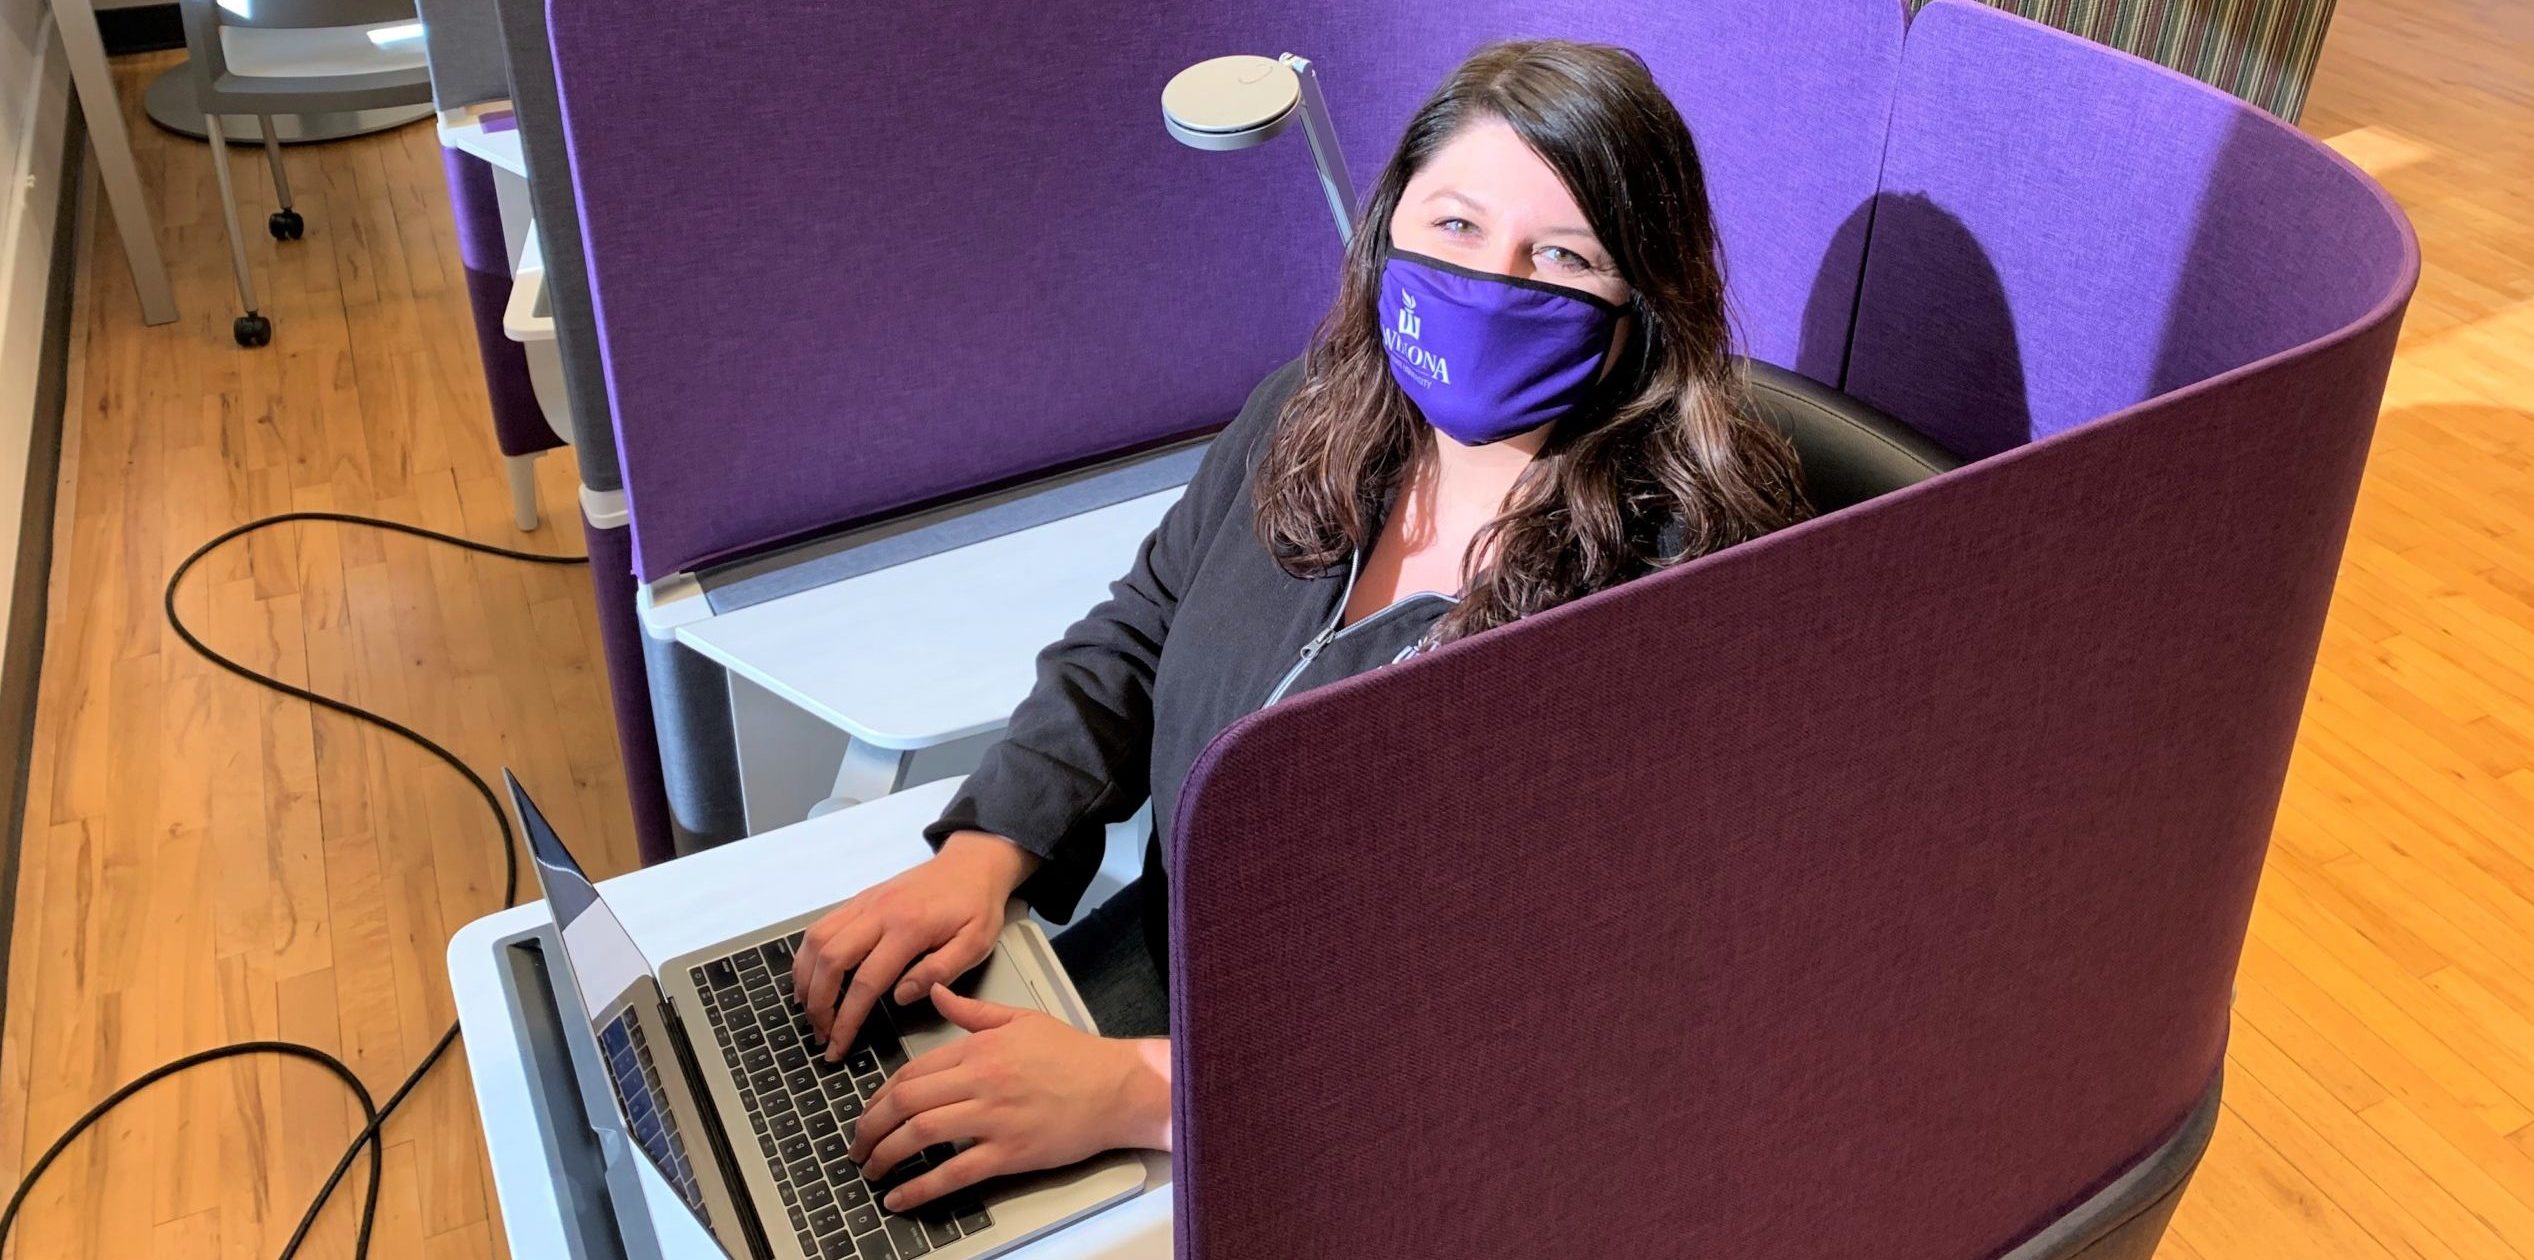 A WSU student studies in the WSU-Rochester on Broadway campus building while wearing a mask and socially distancing.